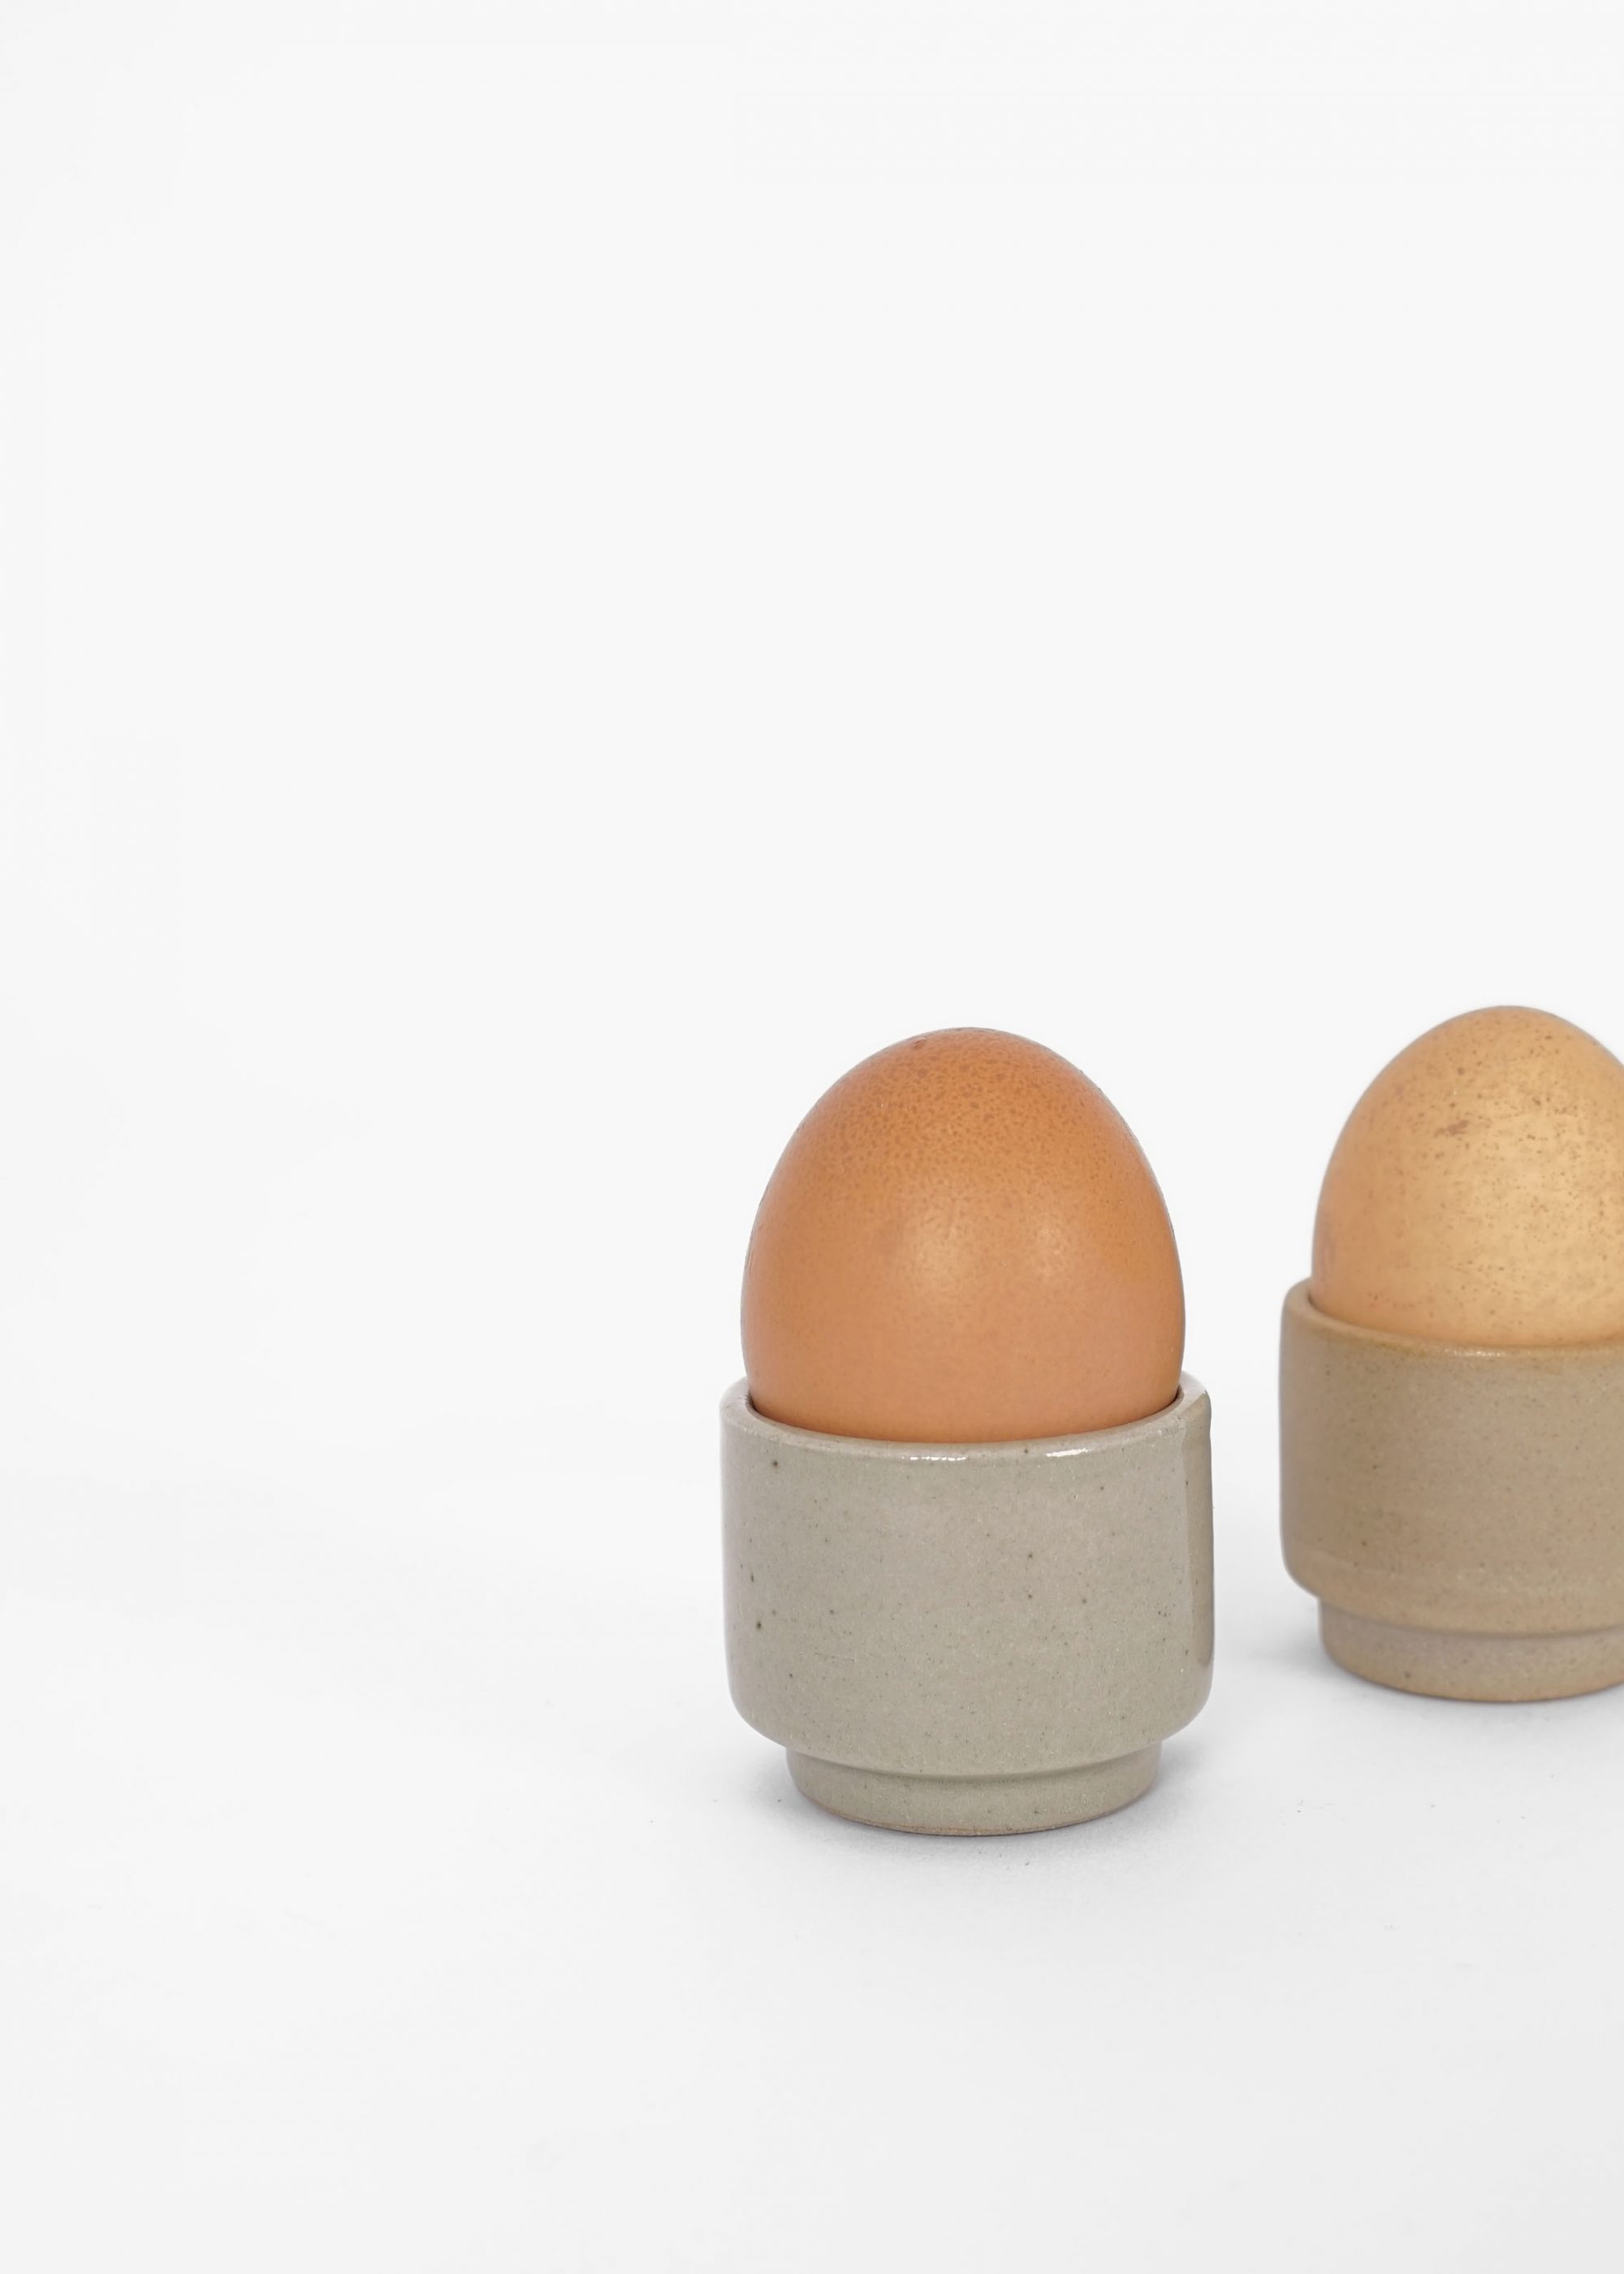 Product image for N° ICSF1 BRUTAL Egg Cup